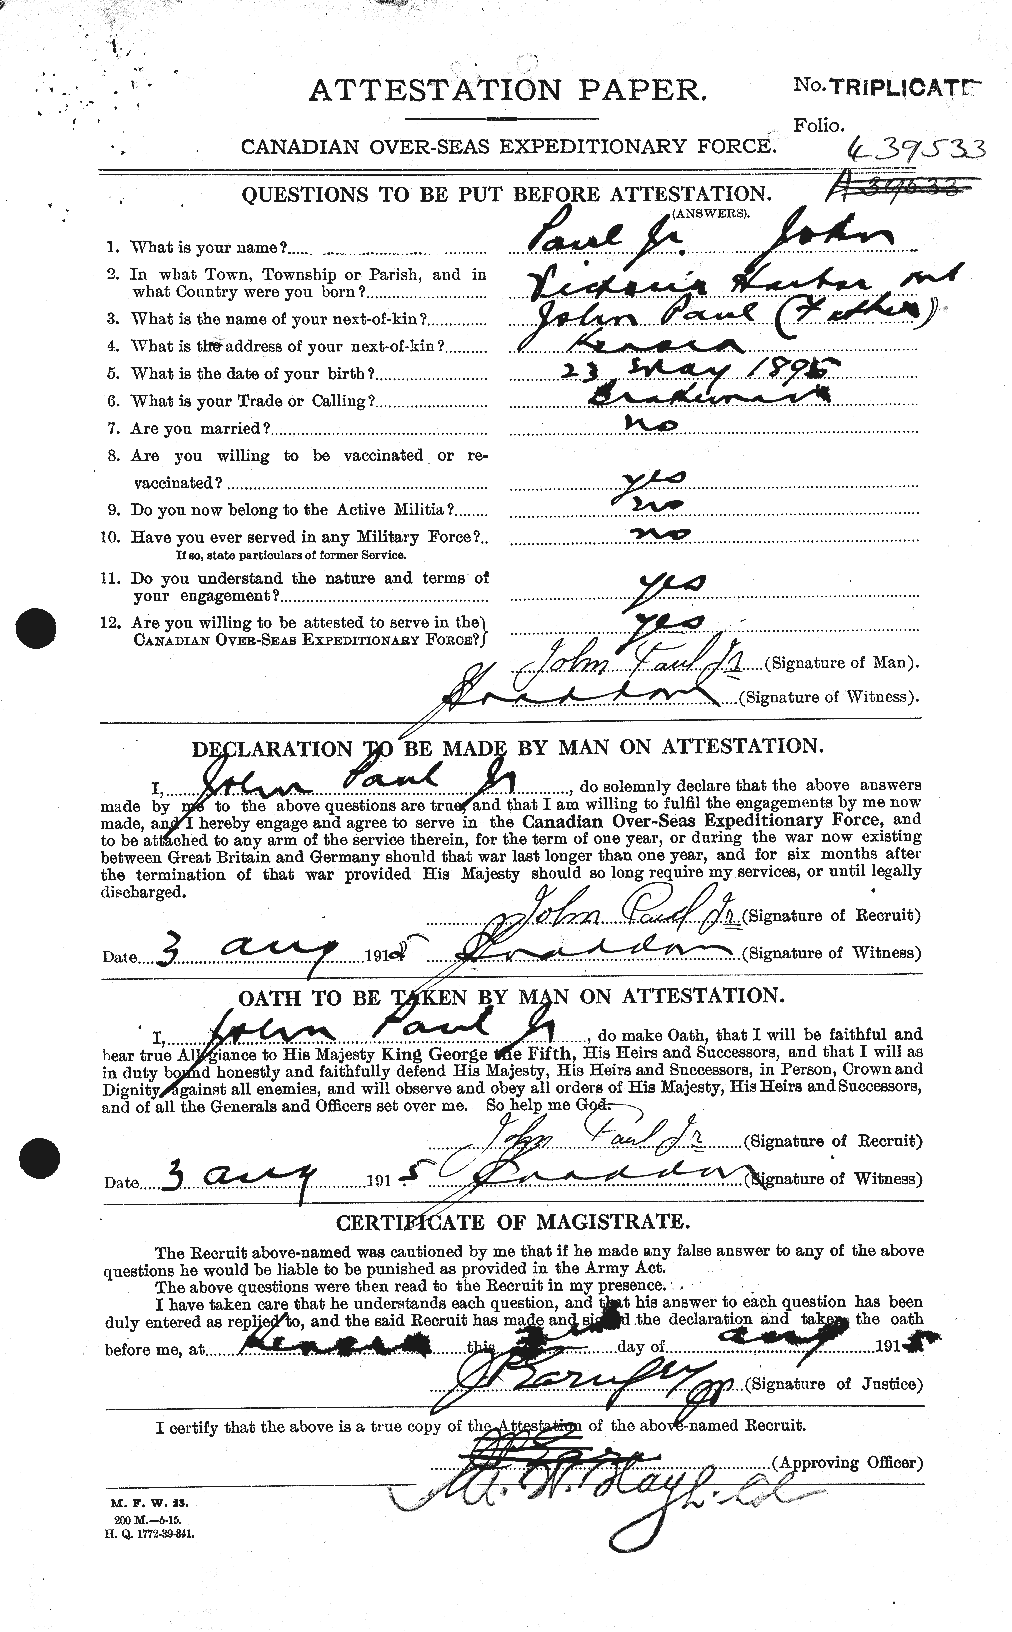 Personnel Records of the First World War - CEF 569248a